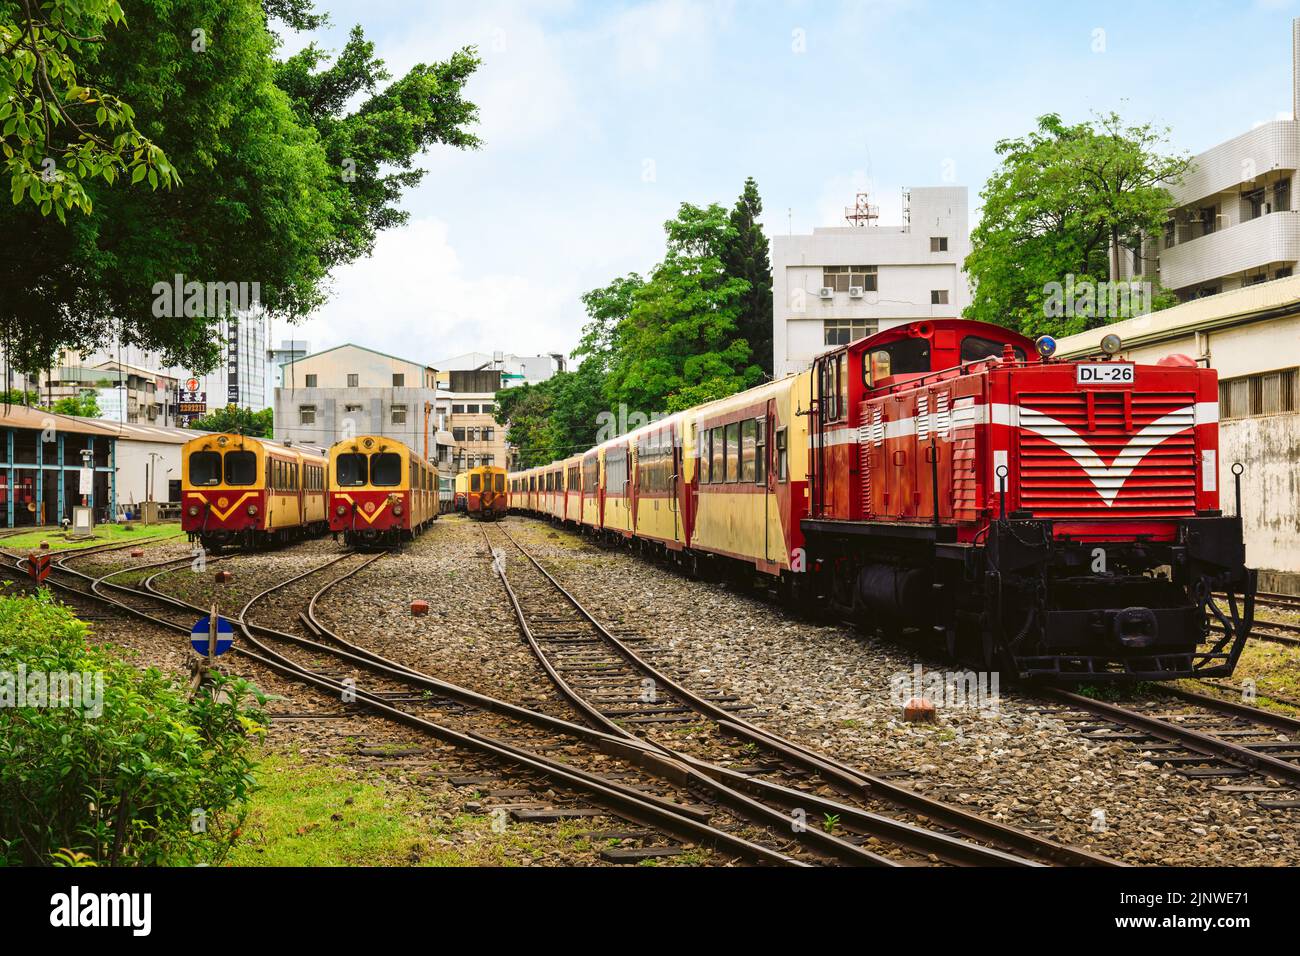 July 15, 2022: Alishan Forest Railway Garage Park, a railway workshop of Alishan Forest Railway in Chiayi, Taiwan, displays various display of trains Stock Photo